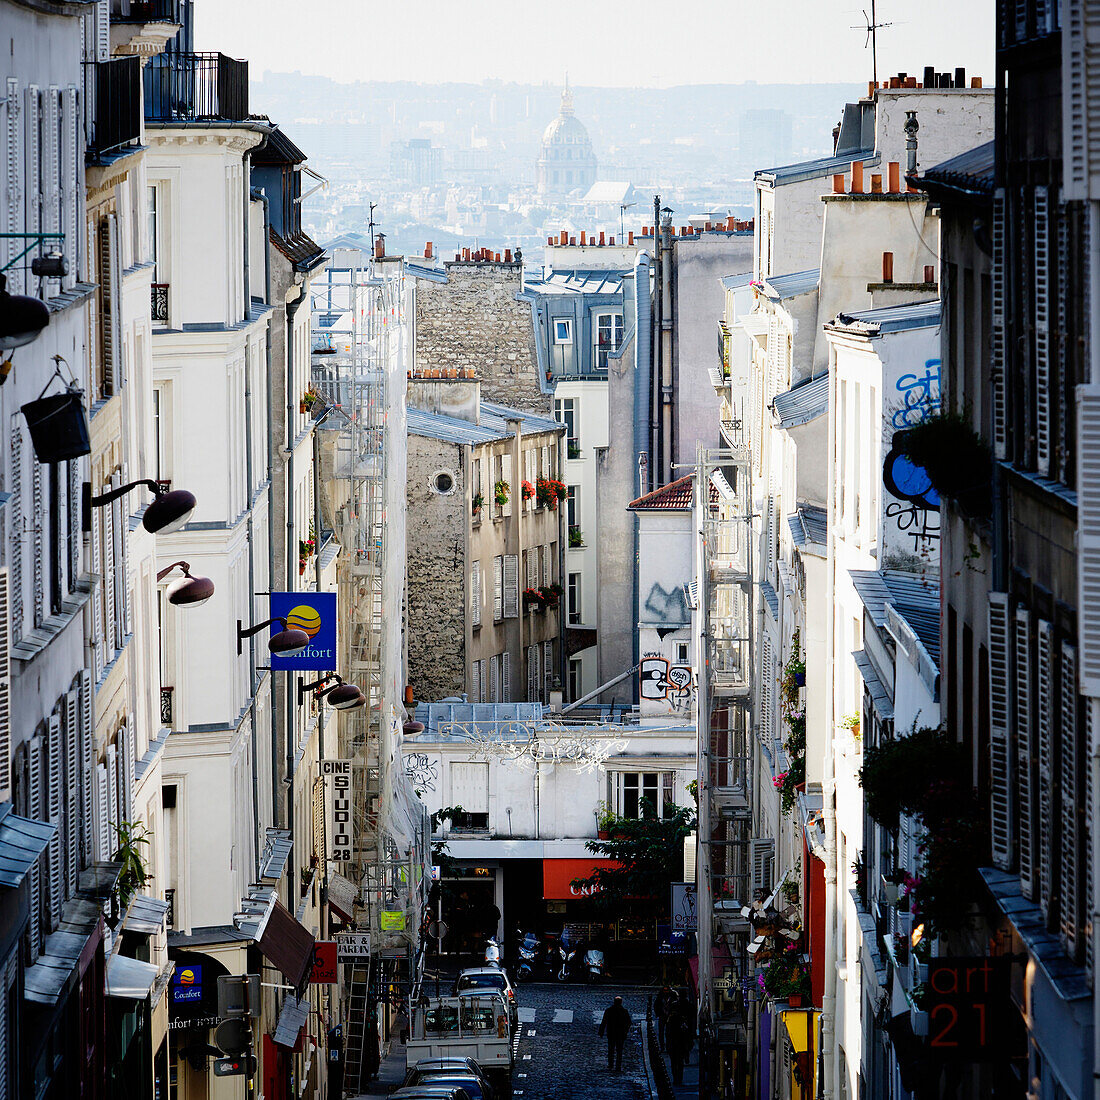 Looking down from the only hill of Paris, through a narrow Parisian street in the Montmartre, is the Paris cityscape.